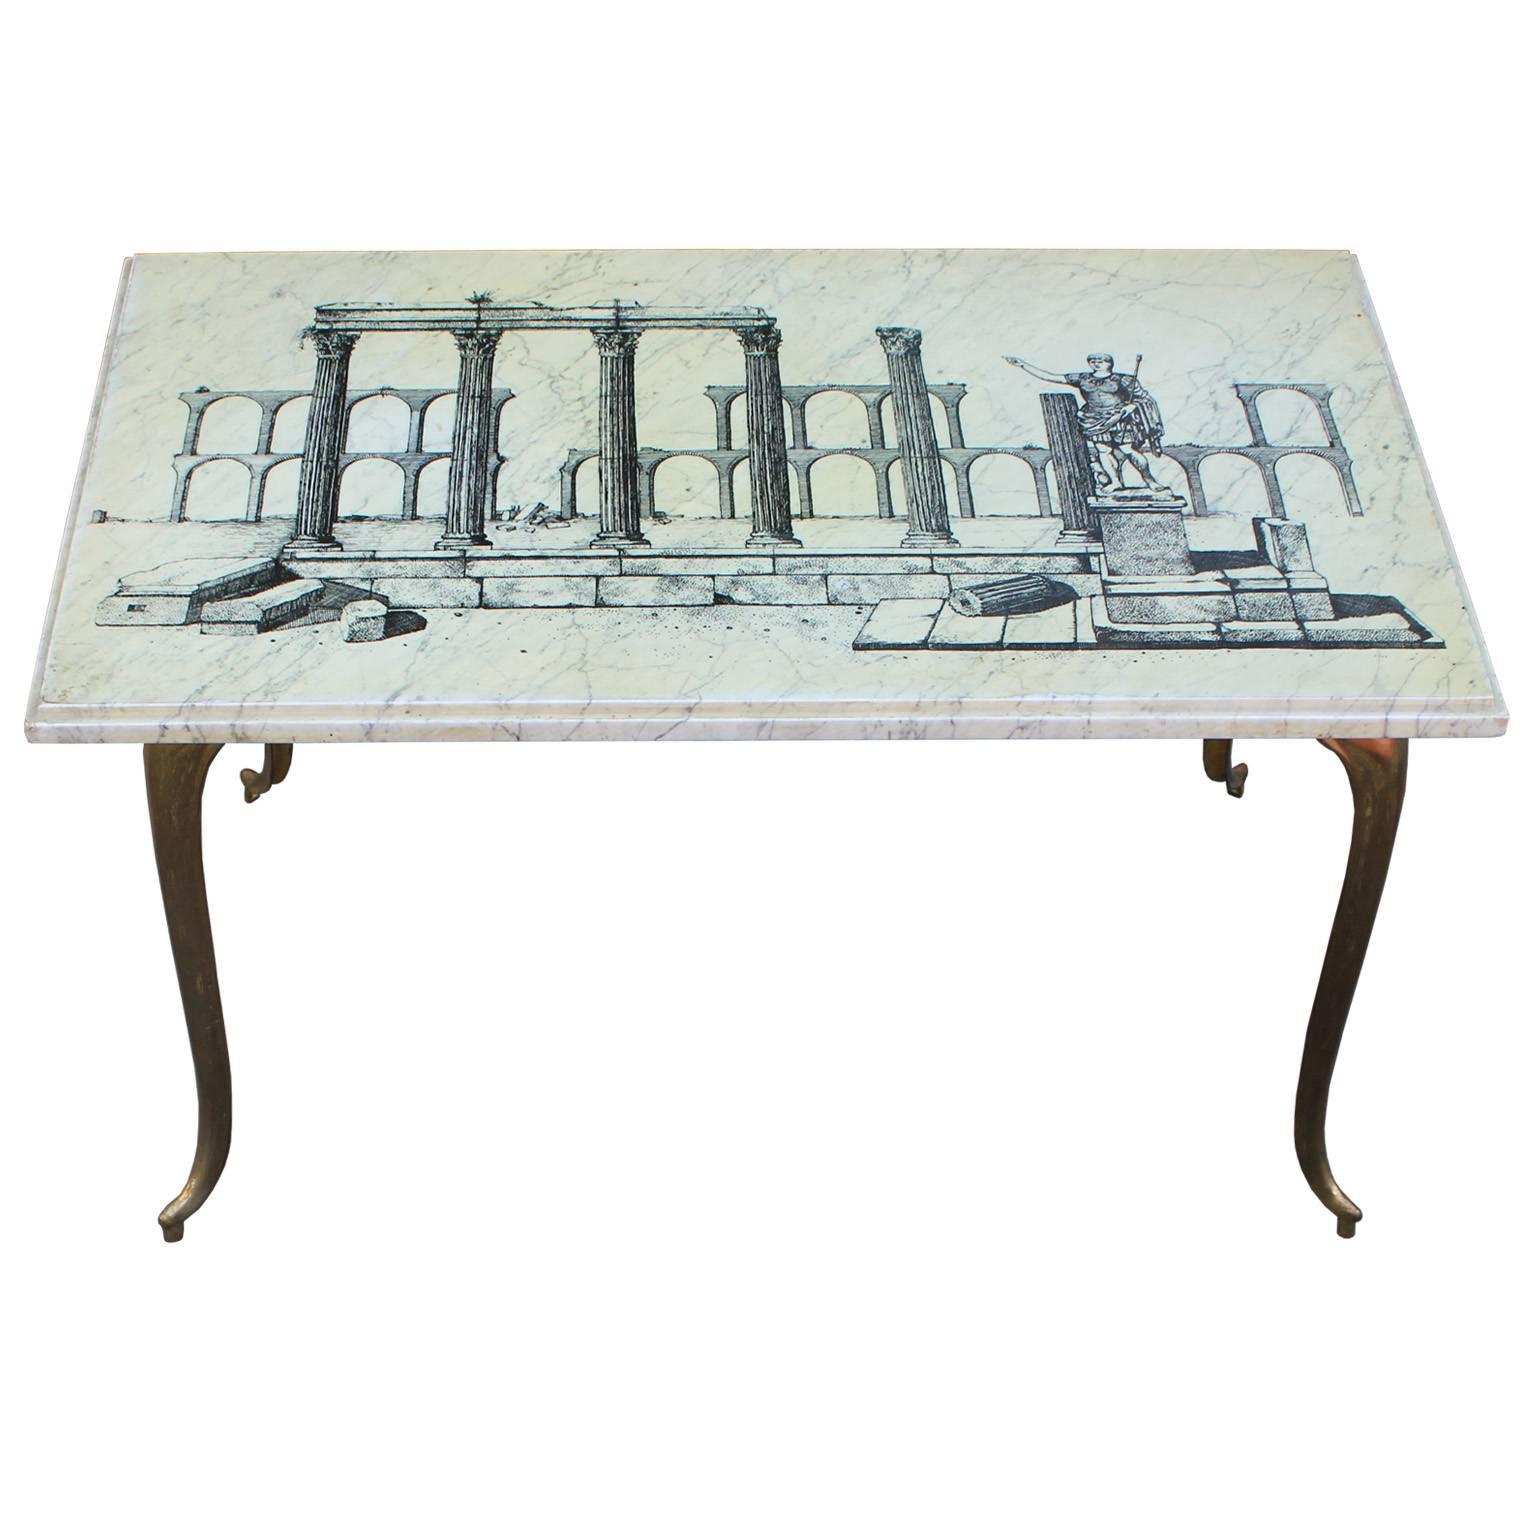 Fabulous and unusual pair of Italian side tables. Marble tops depict an ancient Roman motif featuring columns and aqueducts. Delicate brass legs finish the tables. Perfect in a transitional or Hollywood Regency style interior.